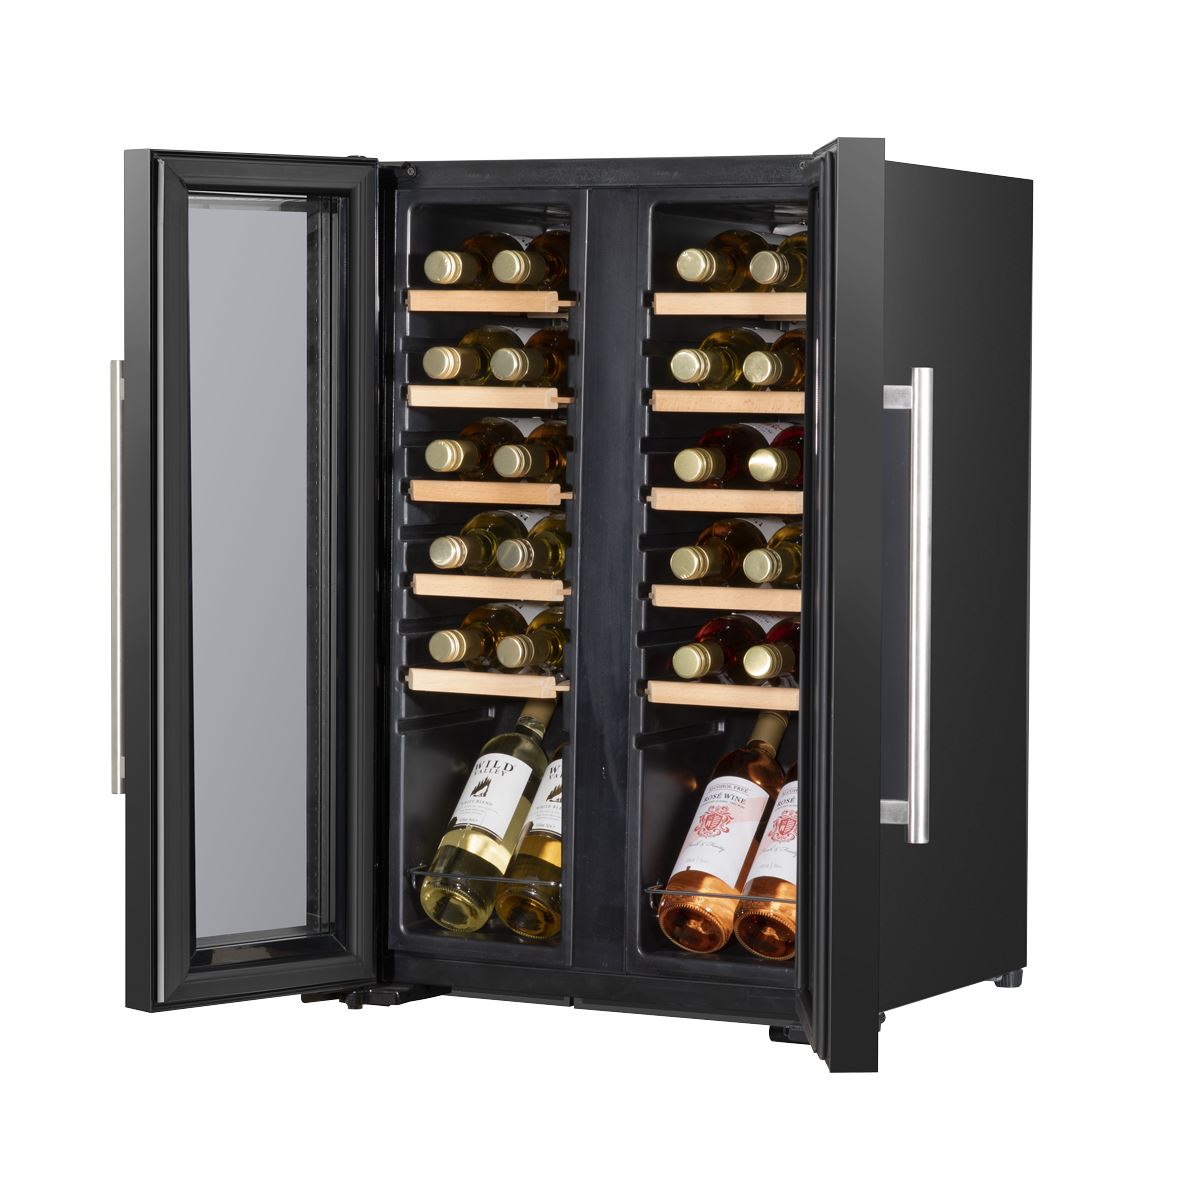 Baridi 24 Bottle Dual Zone Wine Cooler, Fridge, Touch Screen, LED Light Black and Mirror Glass Door